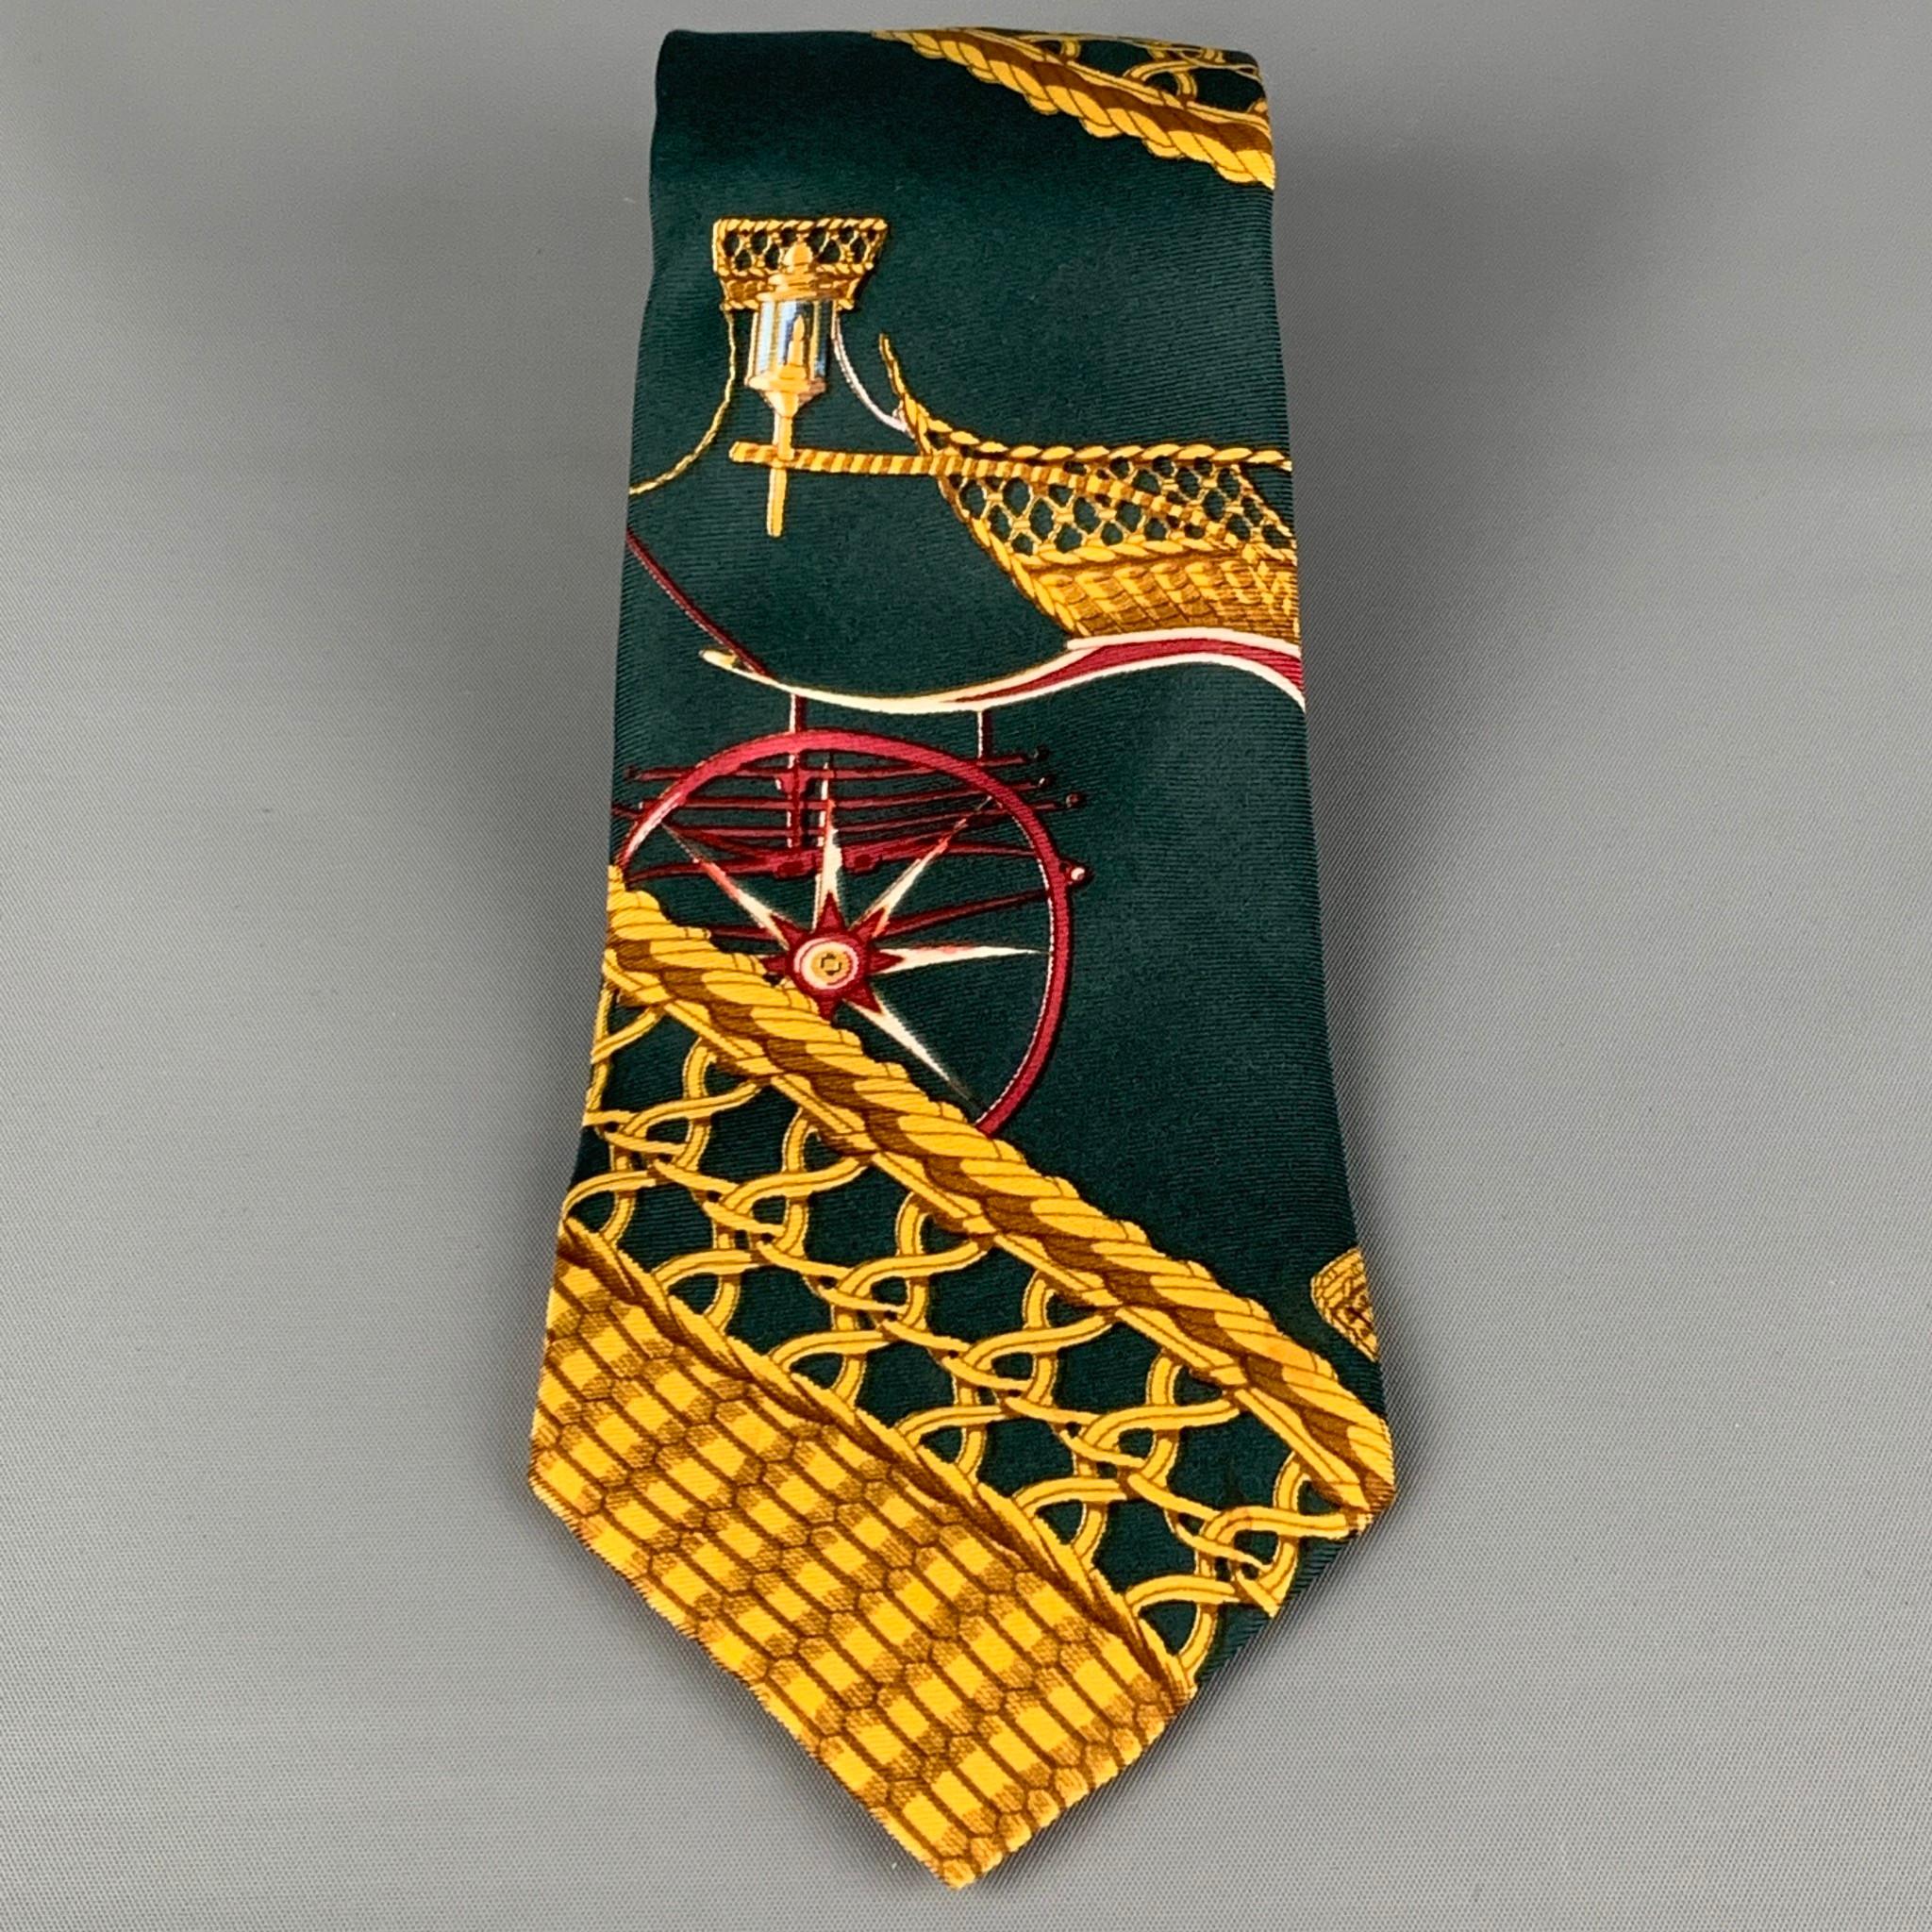 HERMES neck tie comes in a green & gold print silk. Made in France. 

Very Good Pre-Owned Condition.

Measurements:

Width: 3.5 in. 